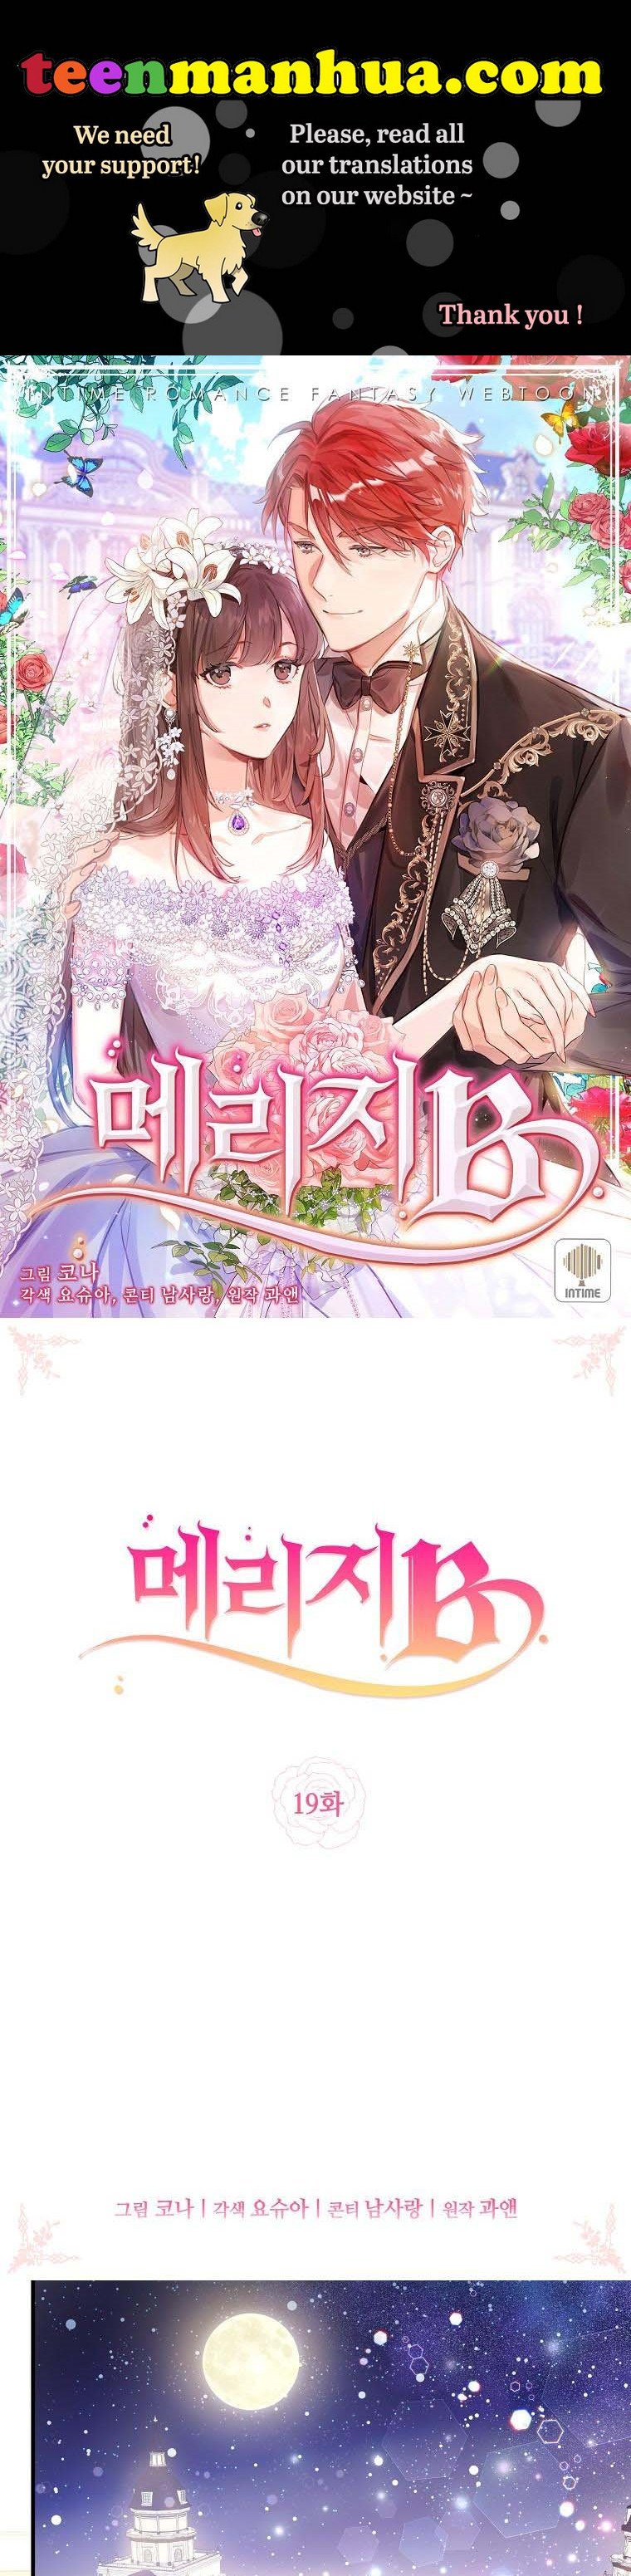 Marriage B chapter 19